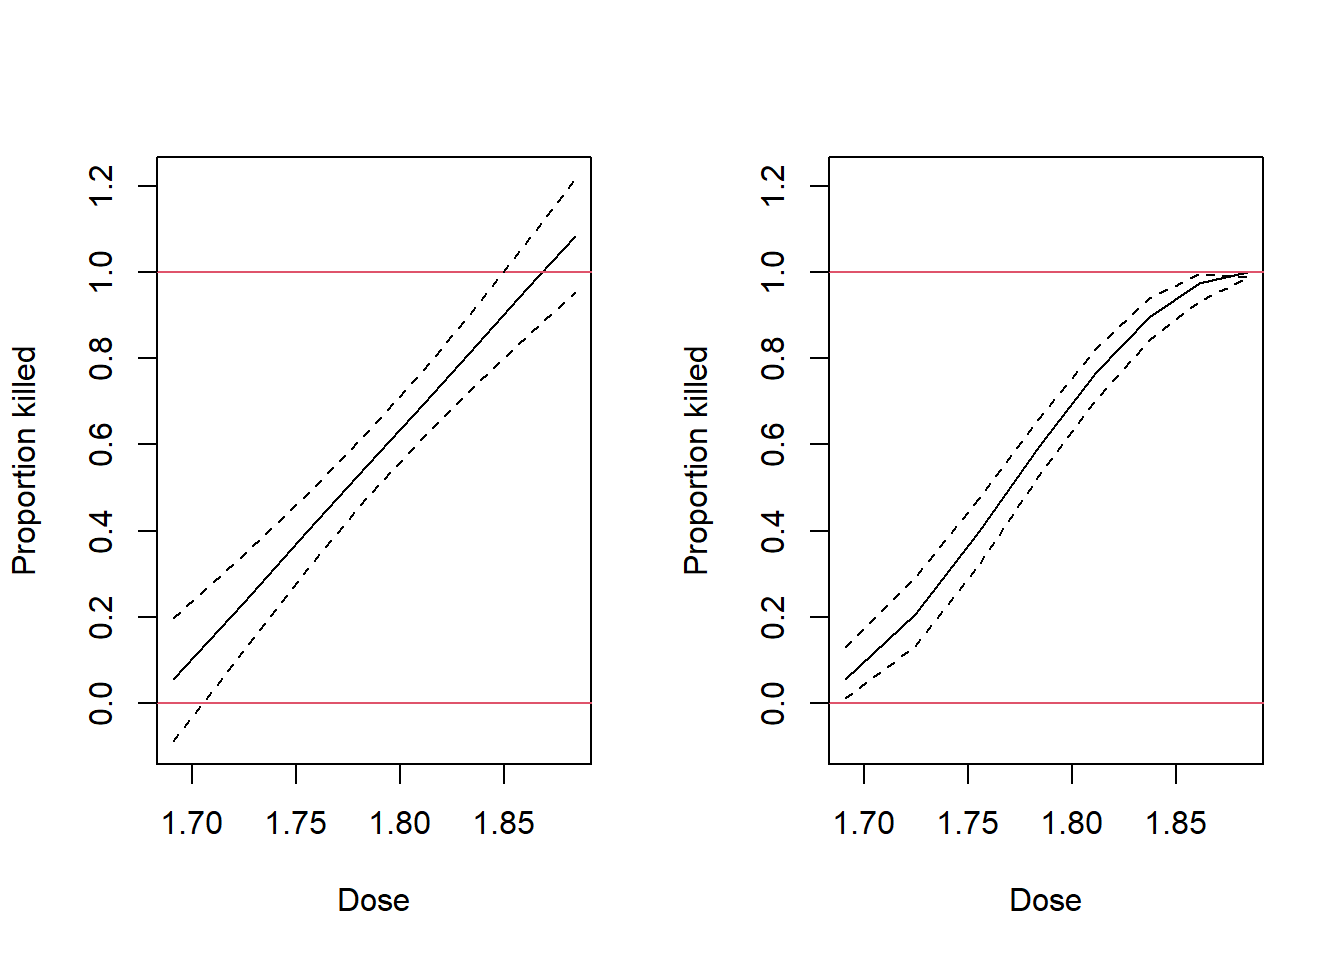 Fitted values from the raw and transformed proportions plotted against dose for the Beetles data.